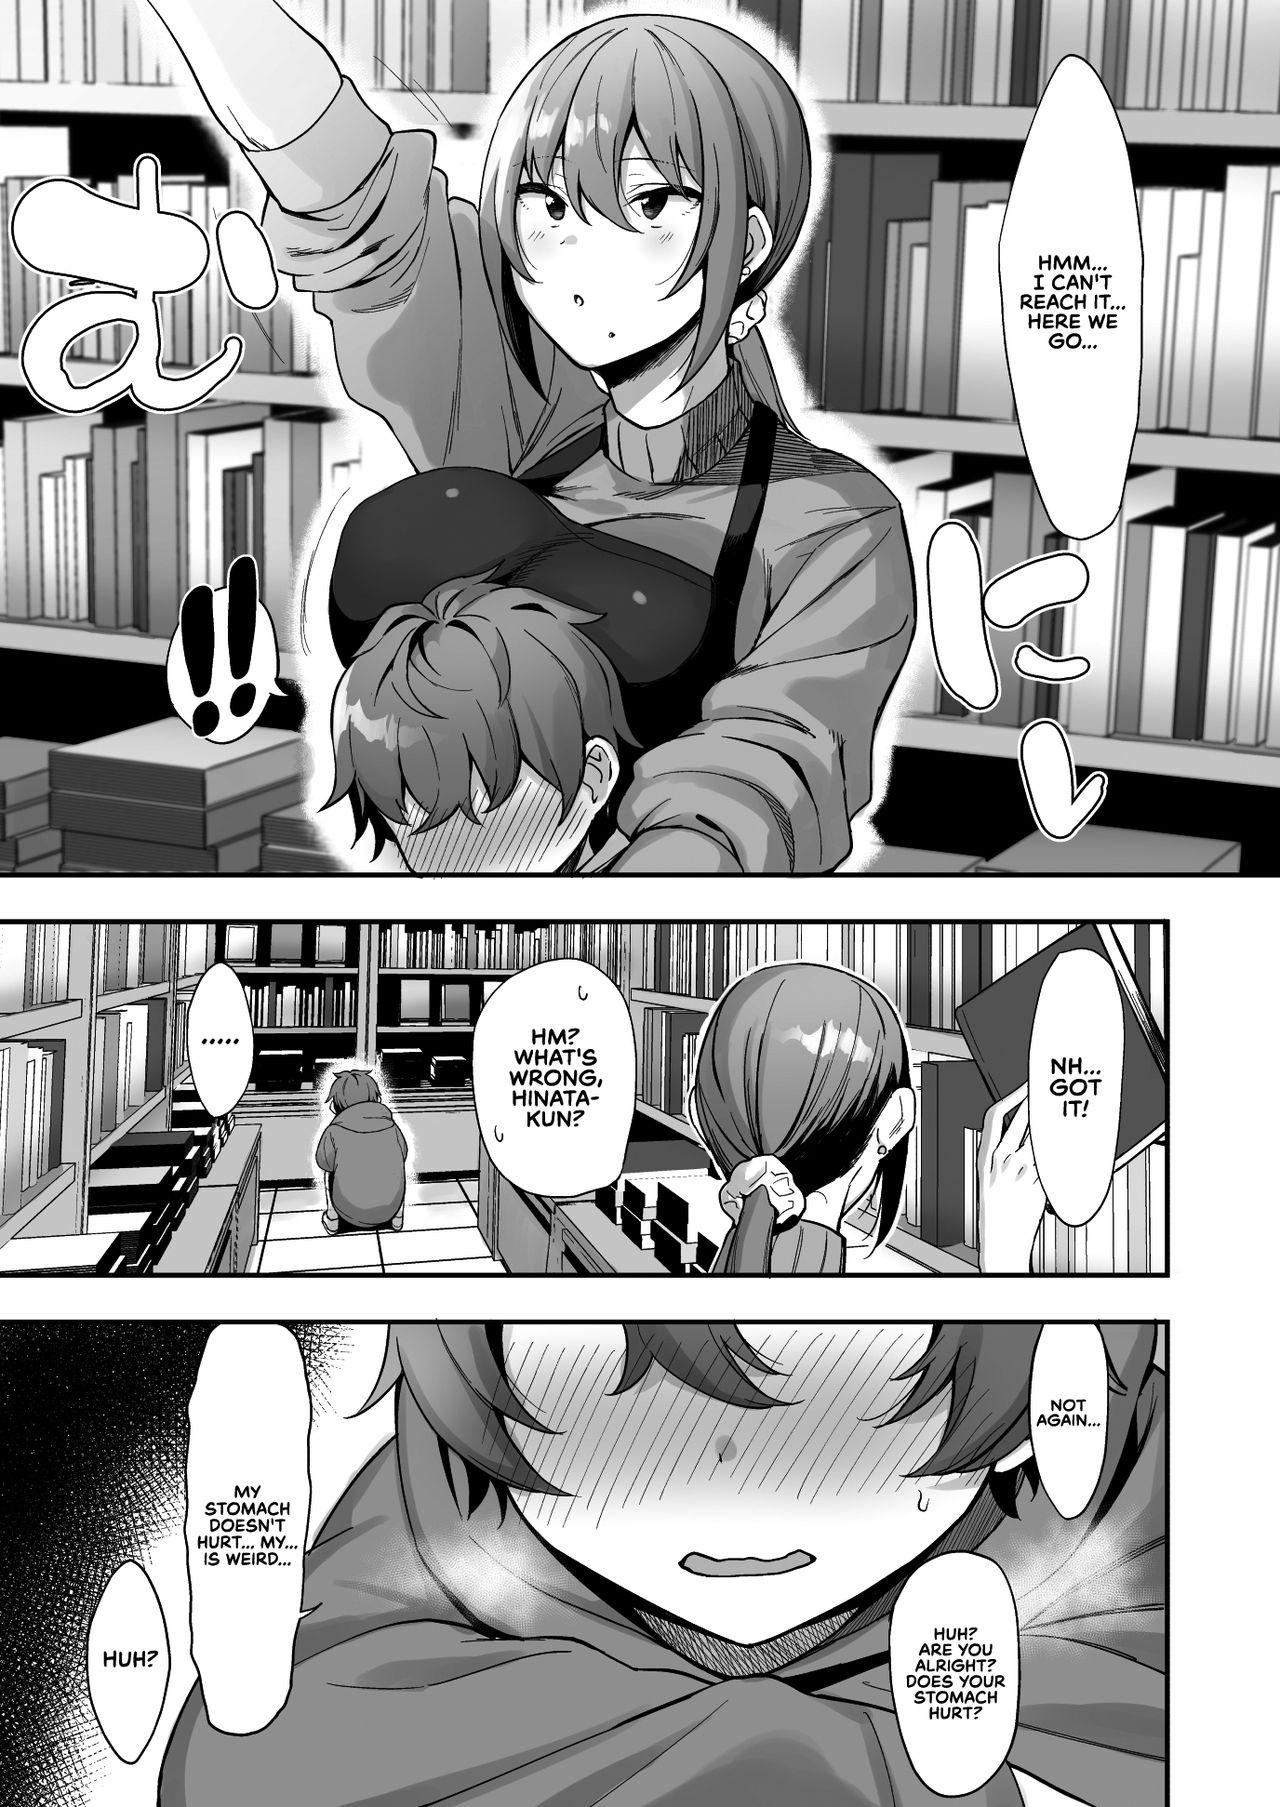 Fudendo Furuhonya no Onee-san to | With The Lady From The Used Book Shop - Original Hand - Page 8